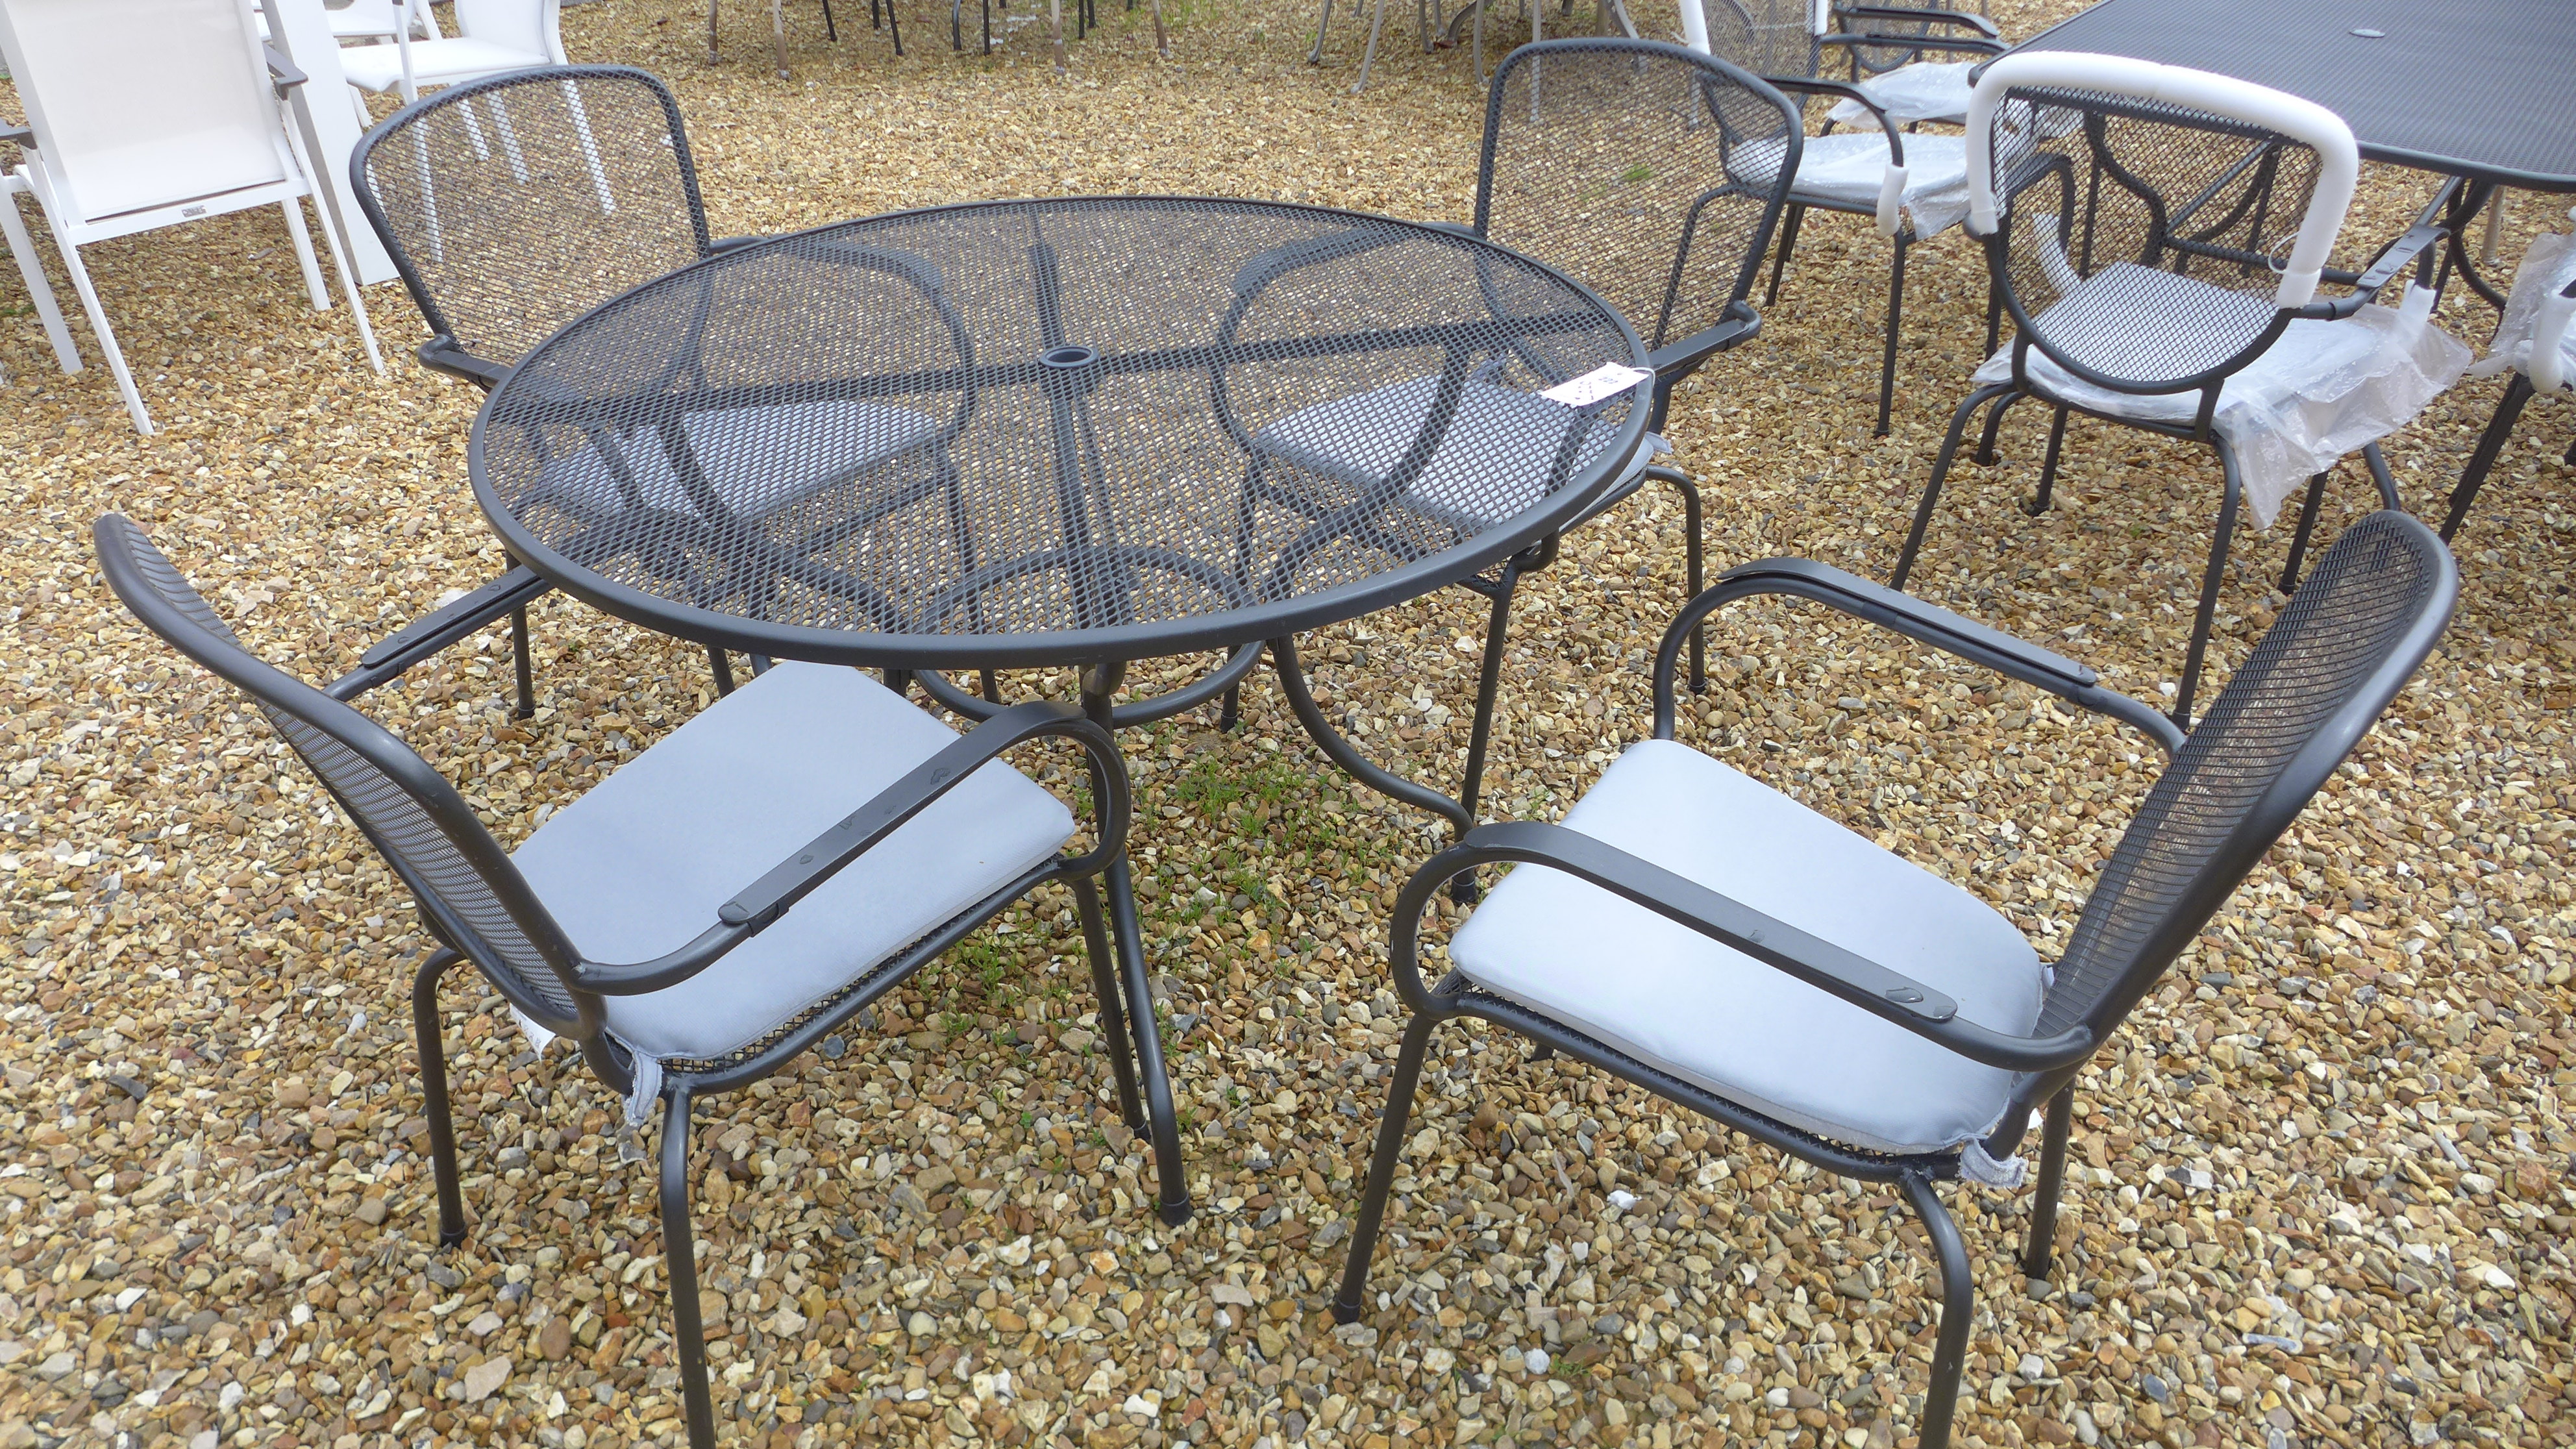 A Bramblecrest Atlantic mesh round table - Diameter 110cm with four chairs and cushions